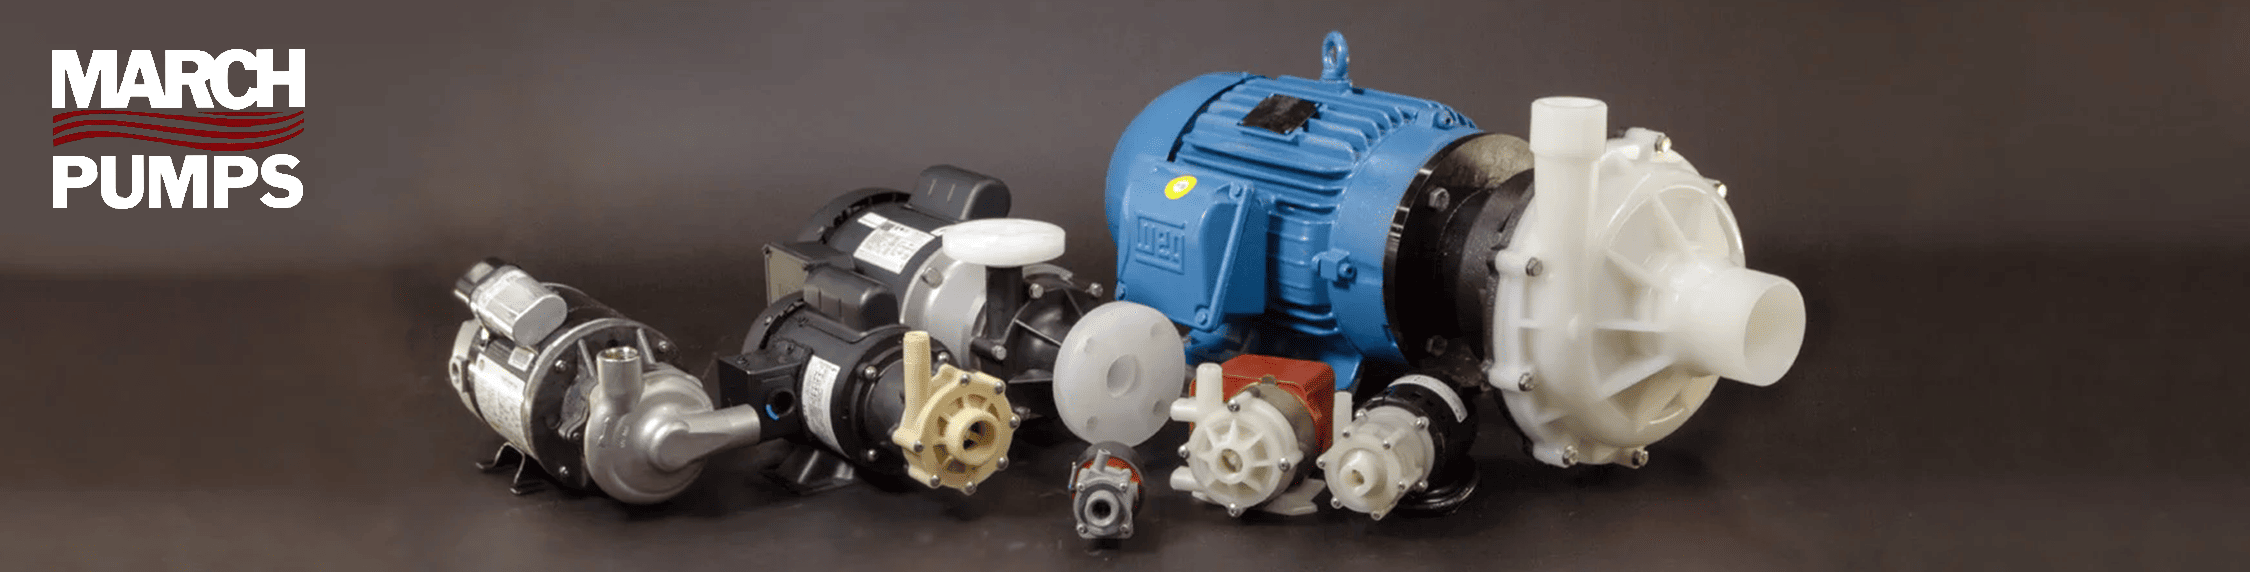 OEM Pumps | Marine Air Conditioning Pumps for Dometic, Webasto & More